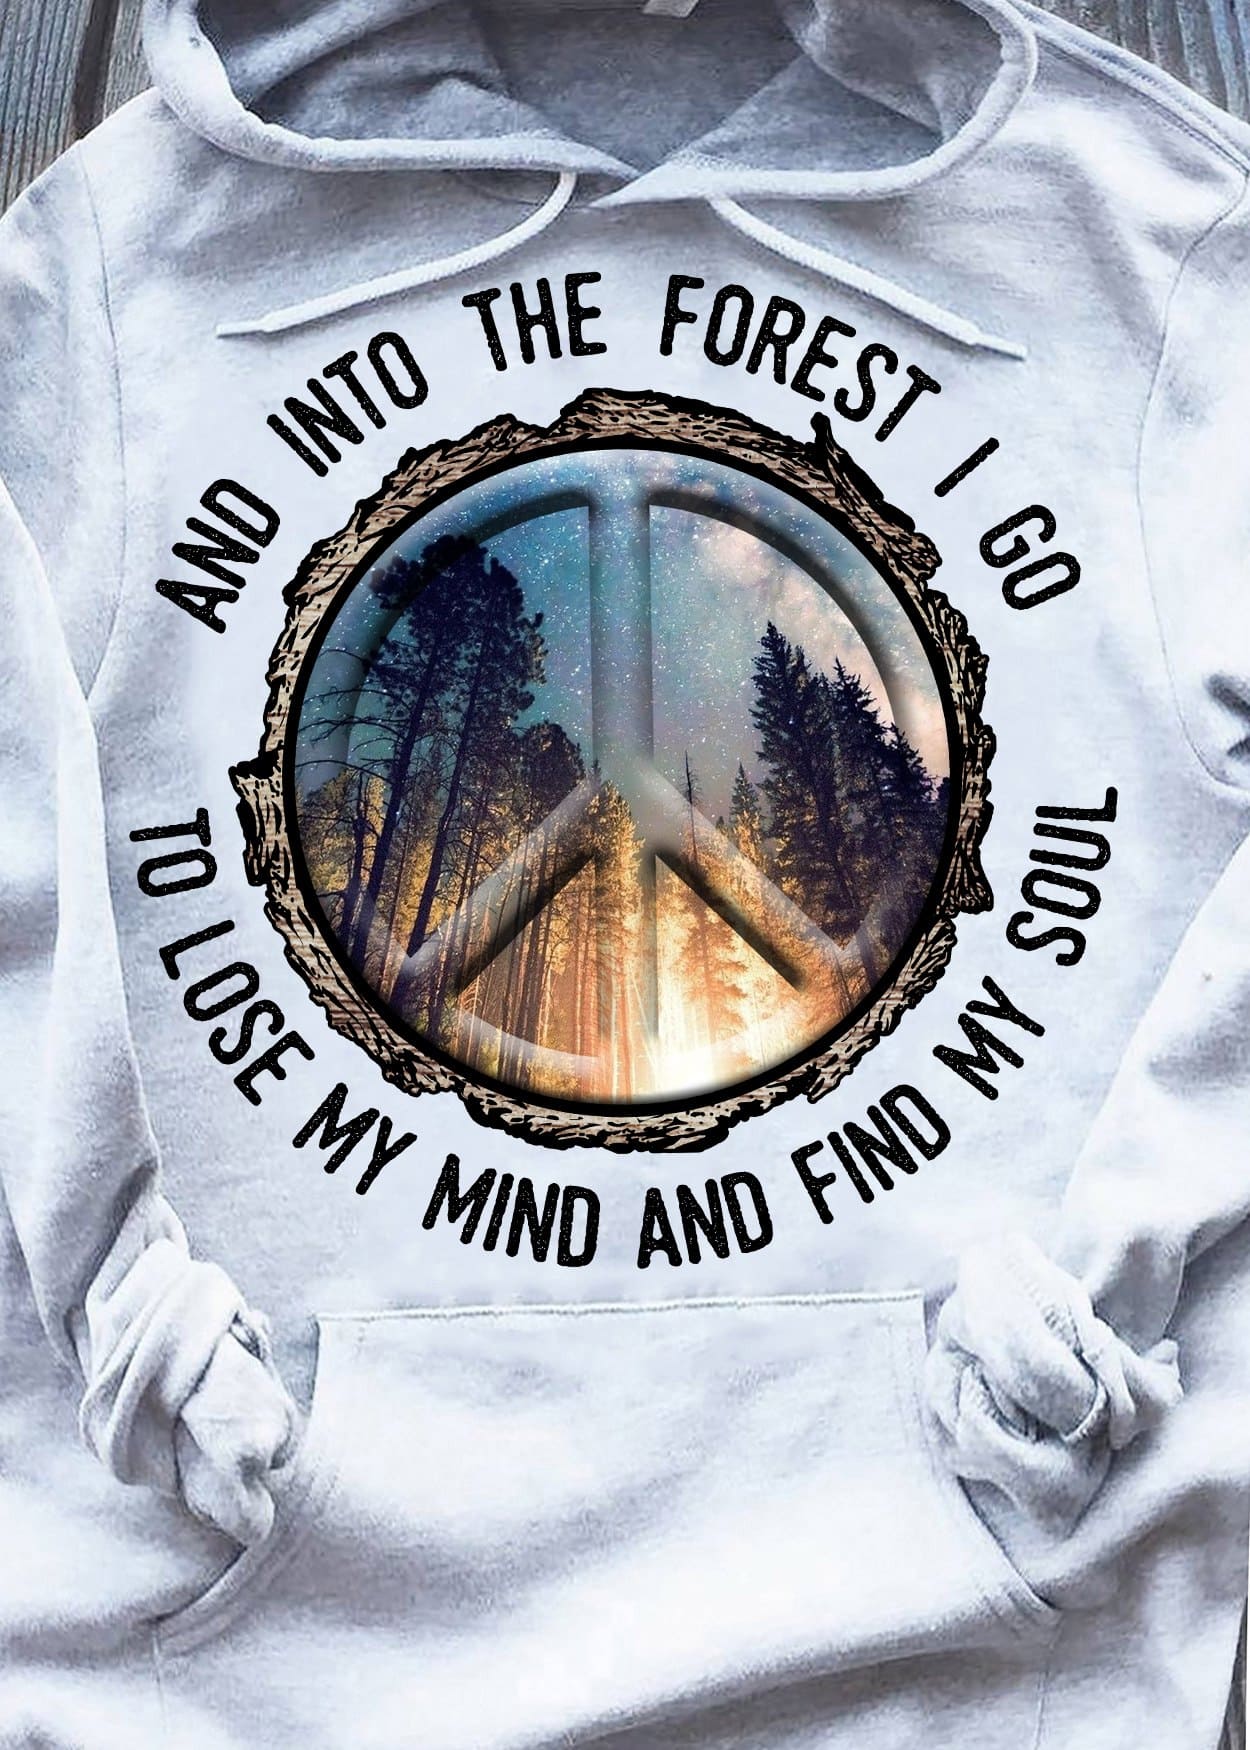 And into the forest I go to lose my mind and find my soul - Peaceful lifestyle, finding peace in forest